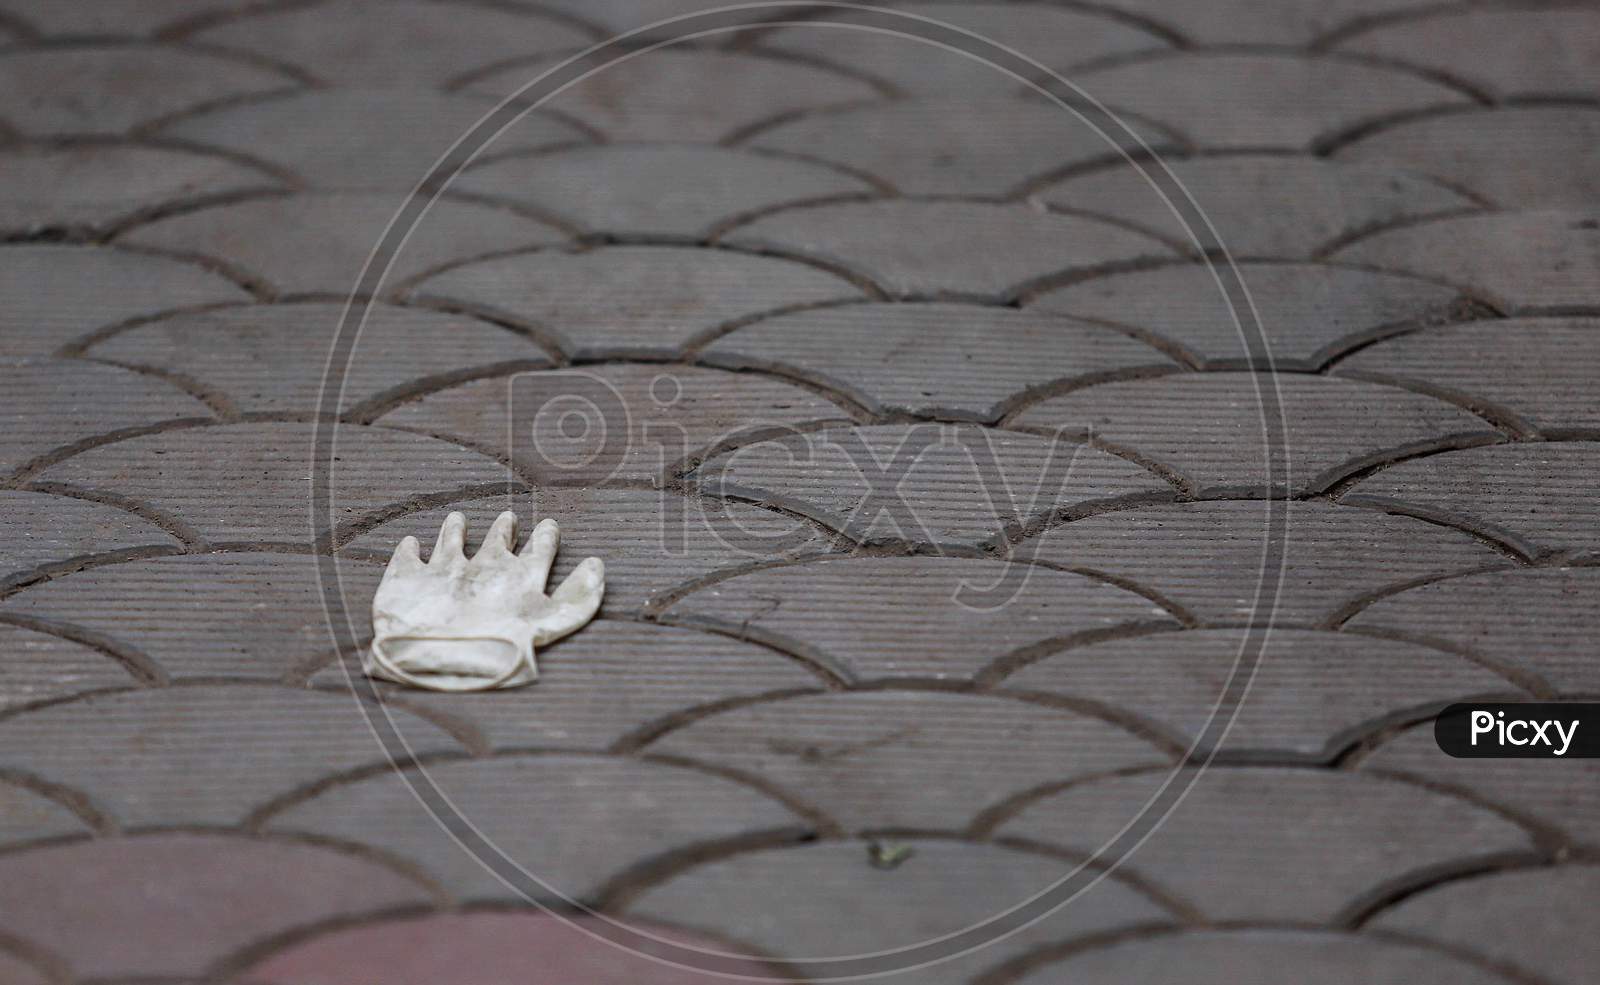 Discarded Latex Gloves Lie On The Ground After the cremation of The Deceased Covid-19 patient At Nigambodh Crematorium In New Delhi, India On May 31, 2020.